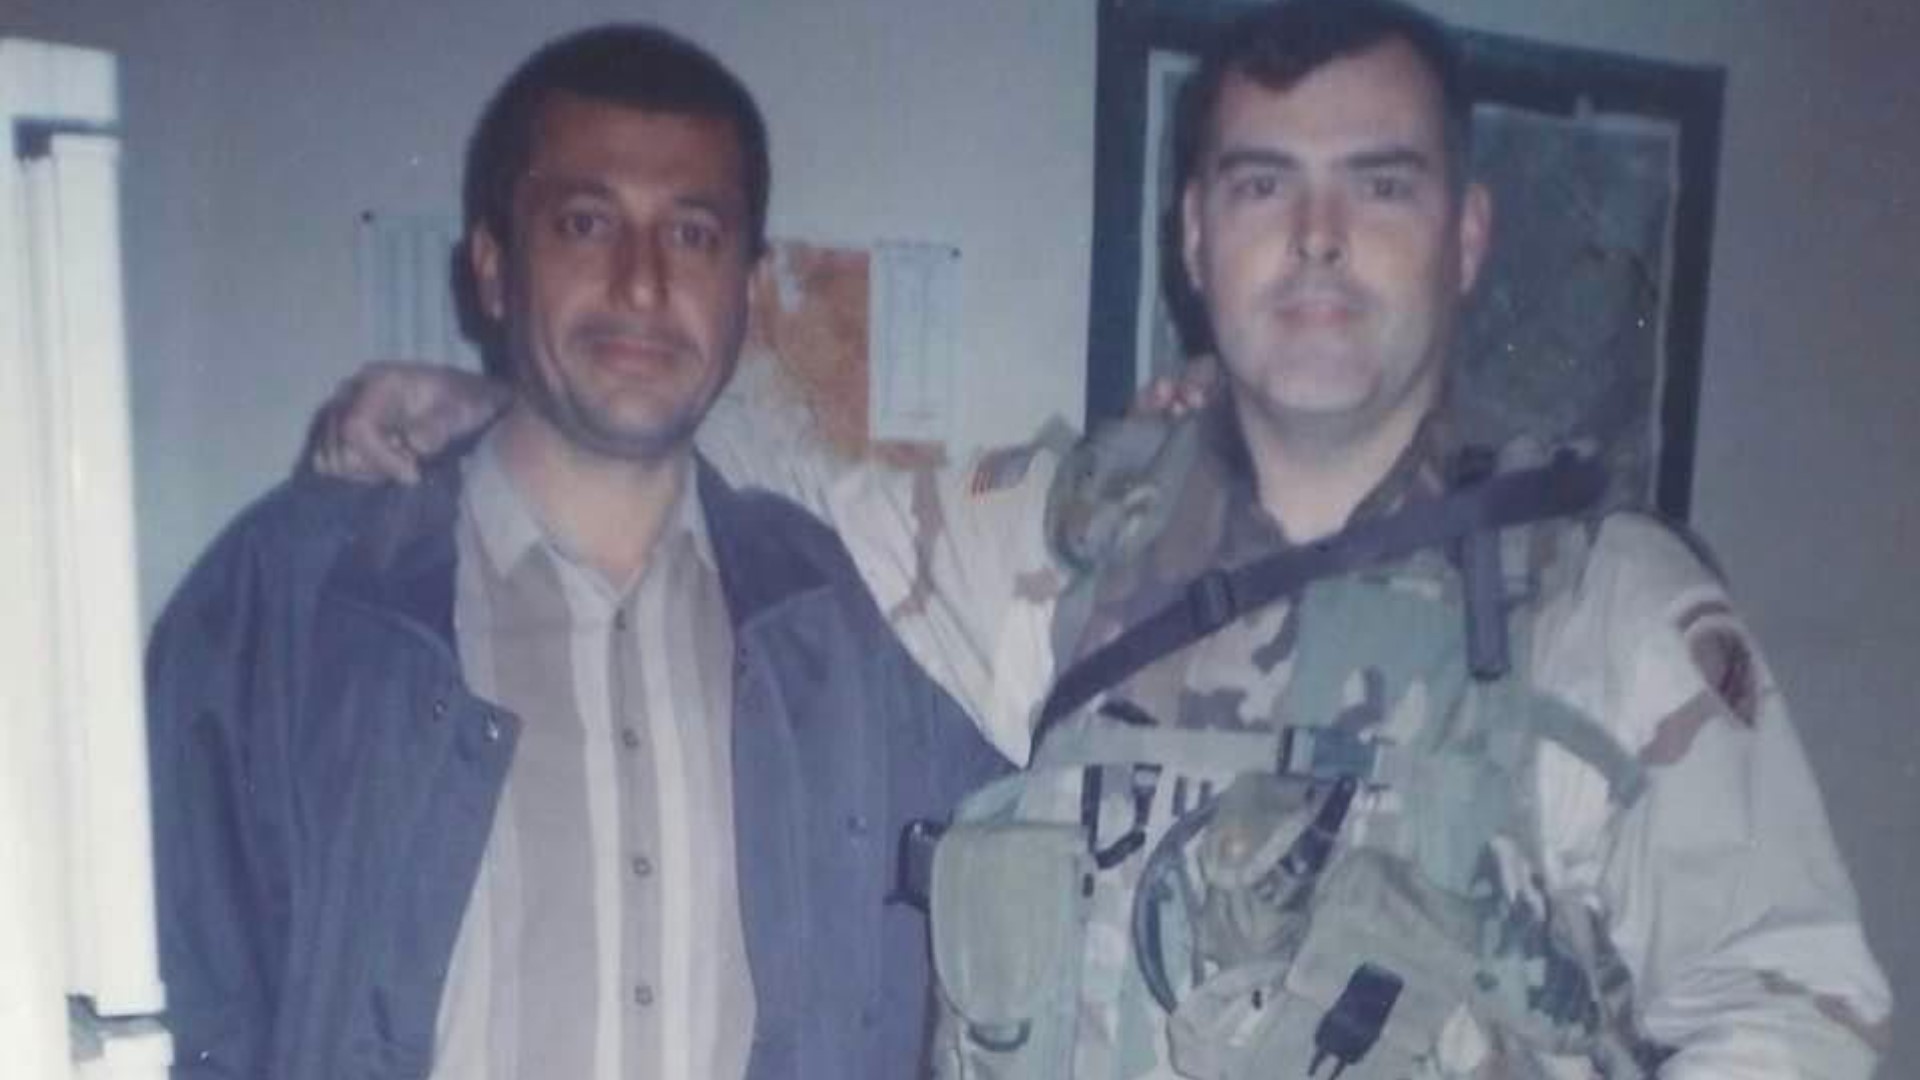 Dallas attorney and Army veteran Allen Vaught will reunite with an Iraqi translator he hasn't seen since 2004. The translator has dodged execution for years.